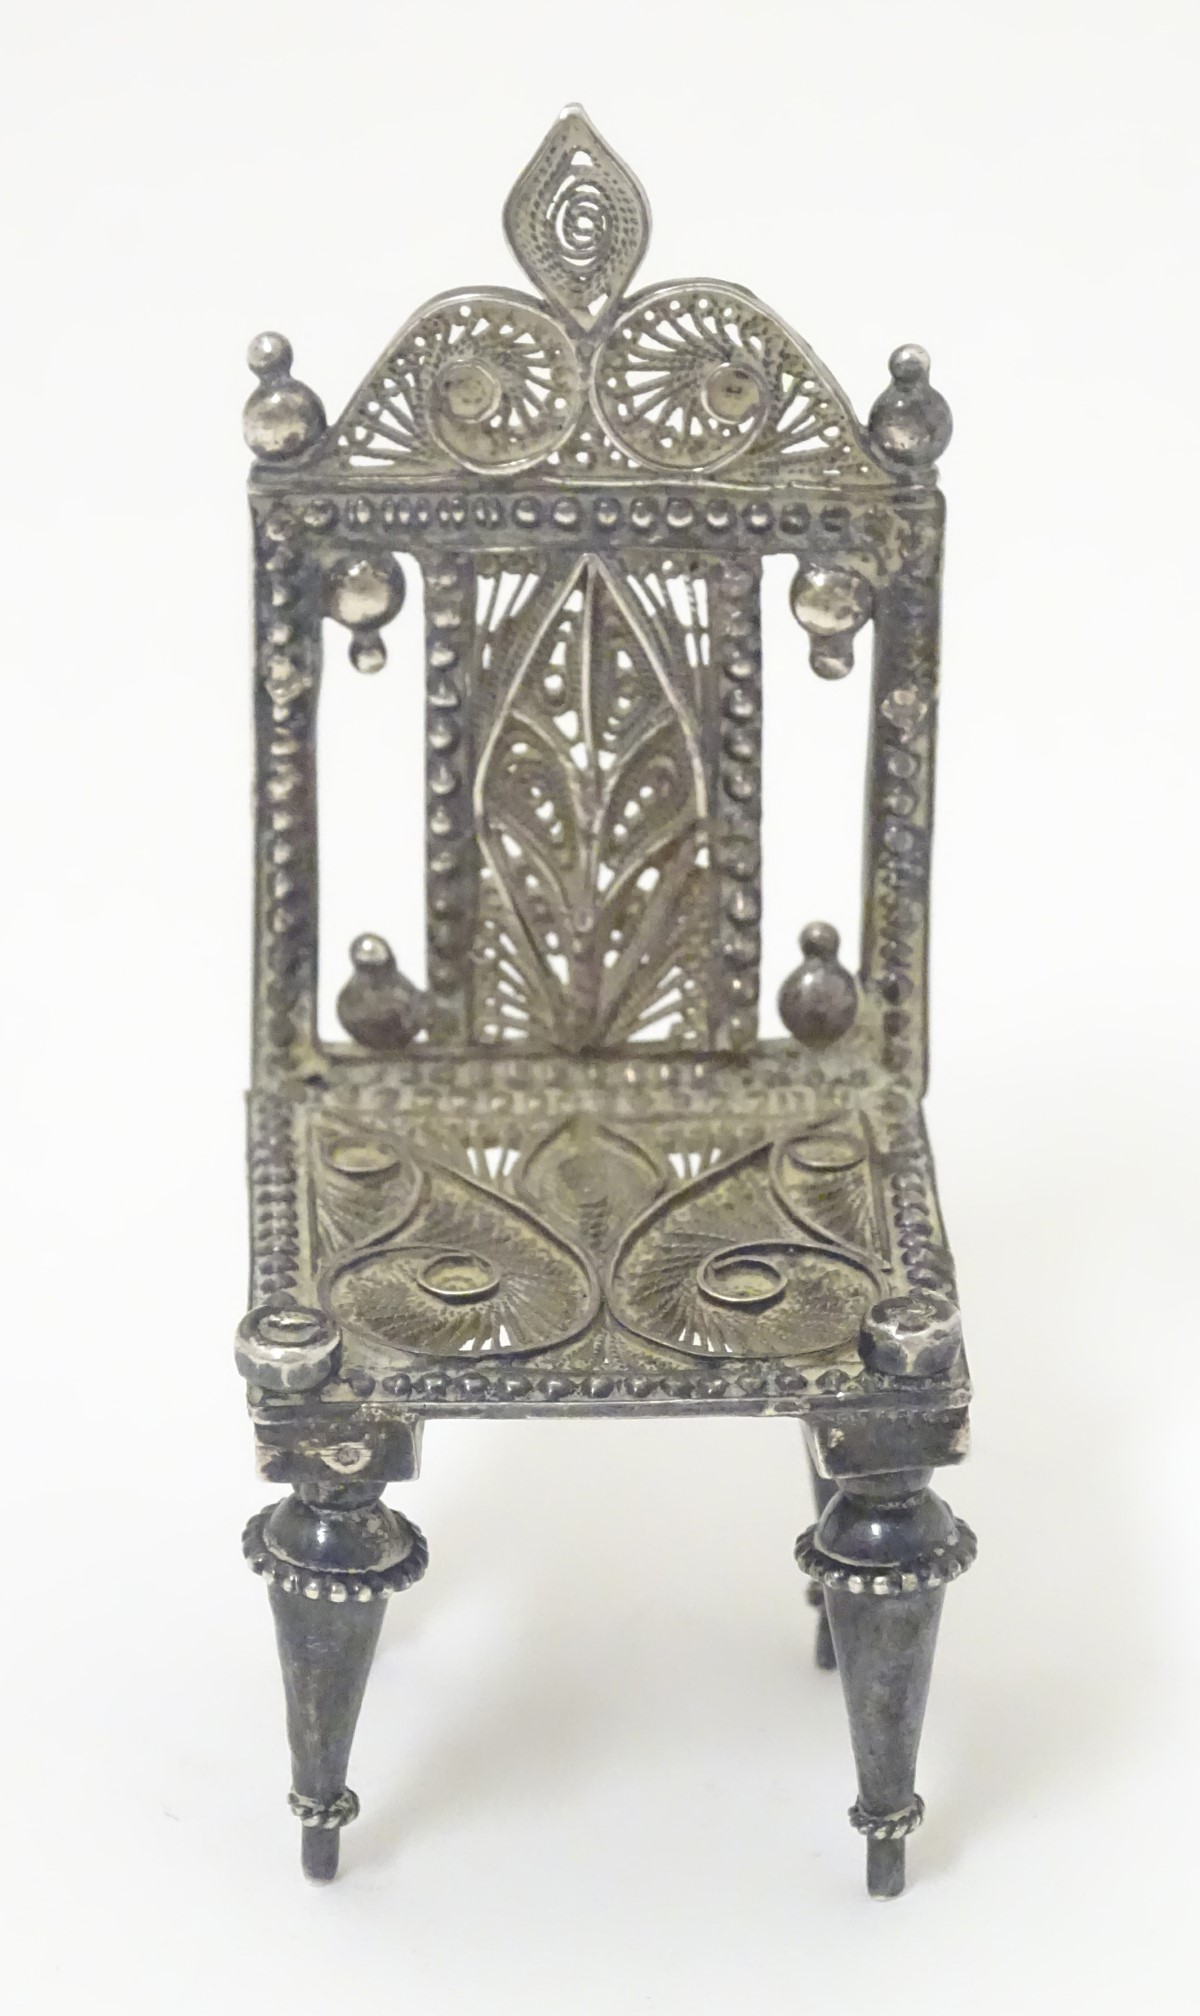 A silver miniature model of a chair with filigree decoration. - Image 3 of 5